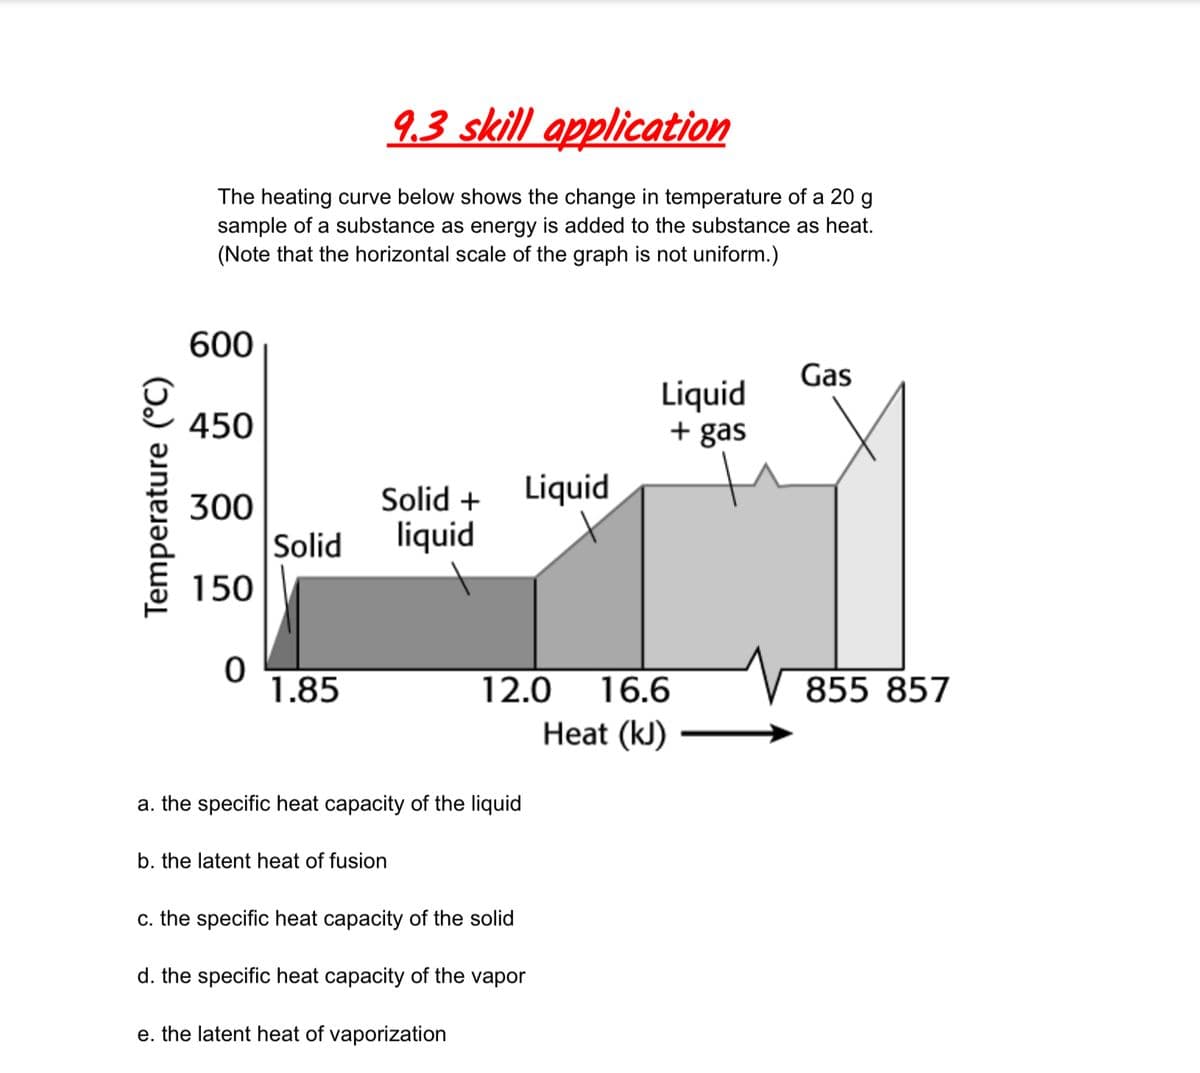 9.3 skill application
The heating curve below shows the change in temperature of a 20 g
sample of a substance as energy is added to the substance as heat.
(Note that the horizontal scale of the graph is not uniform.)
600
Gas
Liquid
+ gas
450
Solid +
Liquid
300
Solid
liquid
150
1.85
12.0
16.6
855 857
Heat (kJ)
a. the specific heat capacity of the liquid
b. the latent heat of fusion
c. the specific heat capacity of the solid
d. the specific heat capacity of the vapor
e. the latent heat of vaporization
Temperature (°C)
